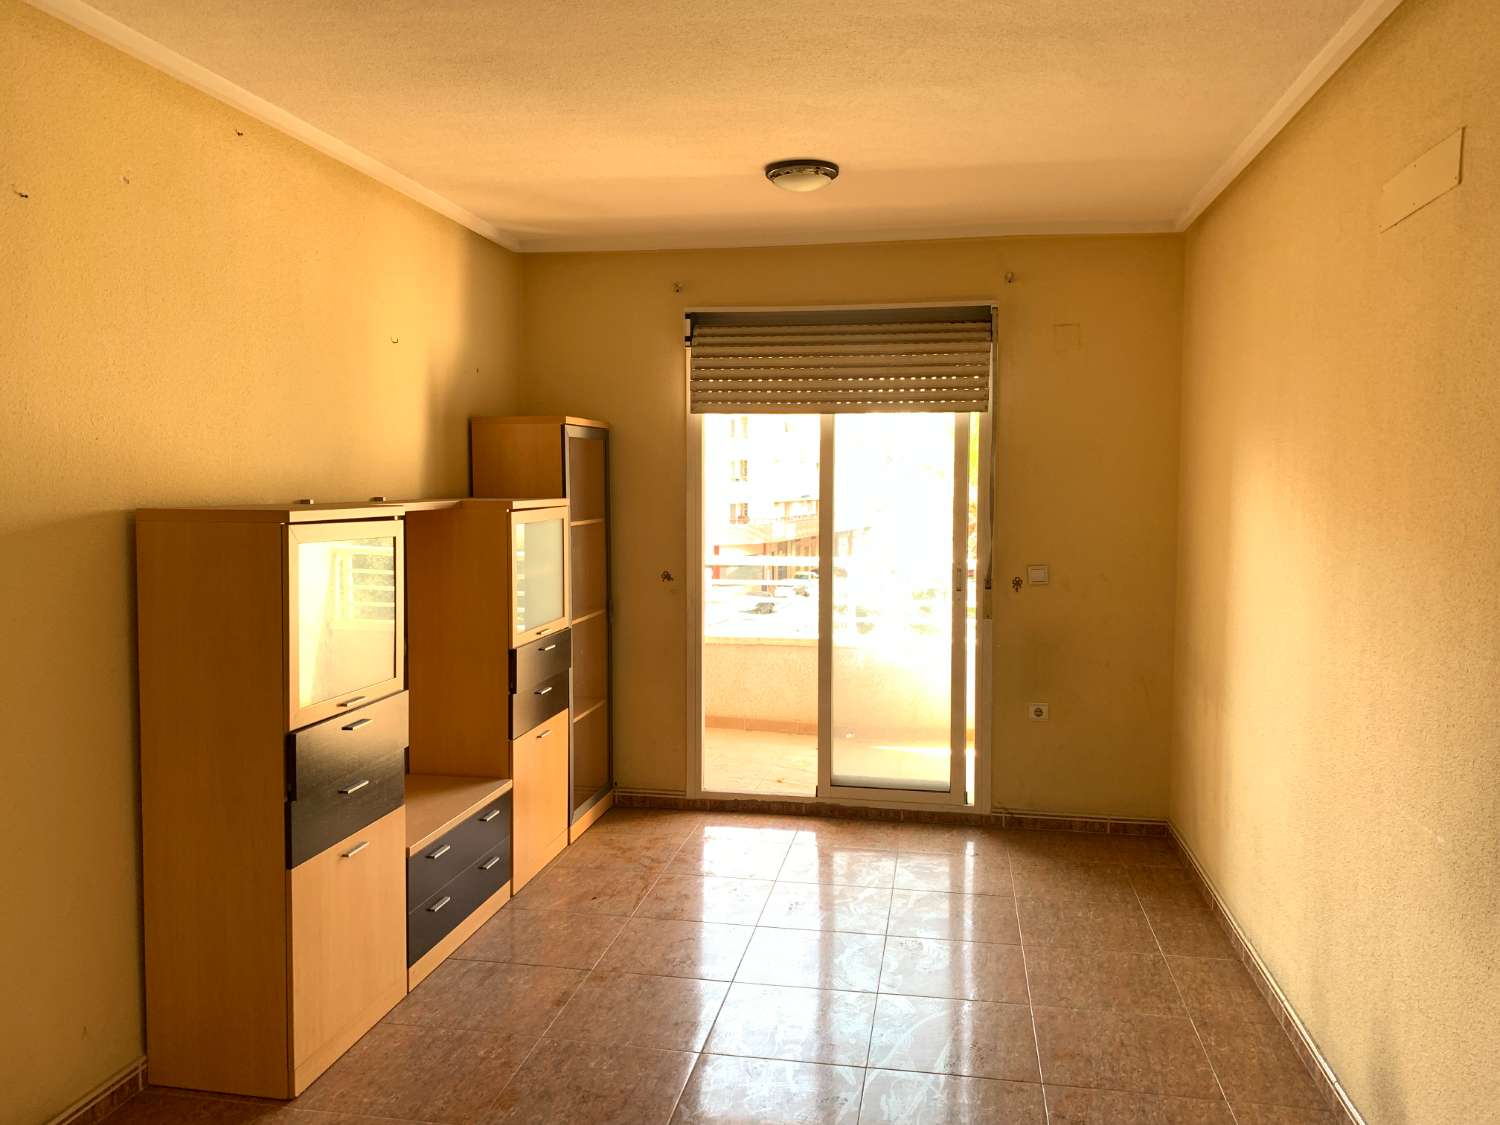 CHANCE!! 2 BEDROOM APARTMENT 2 GARAGE SPACES AND POOL!!